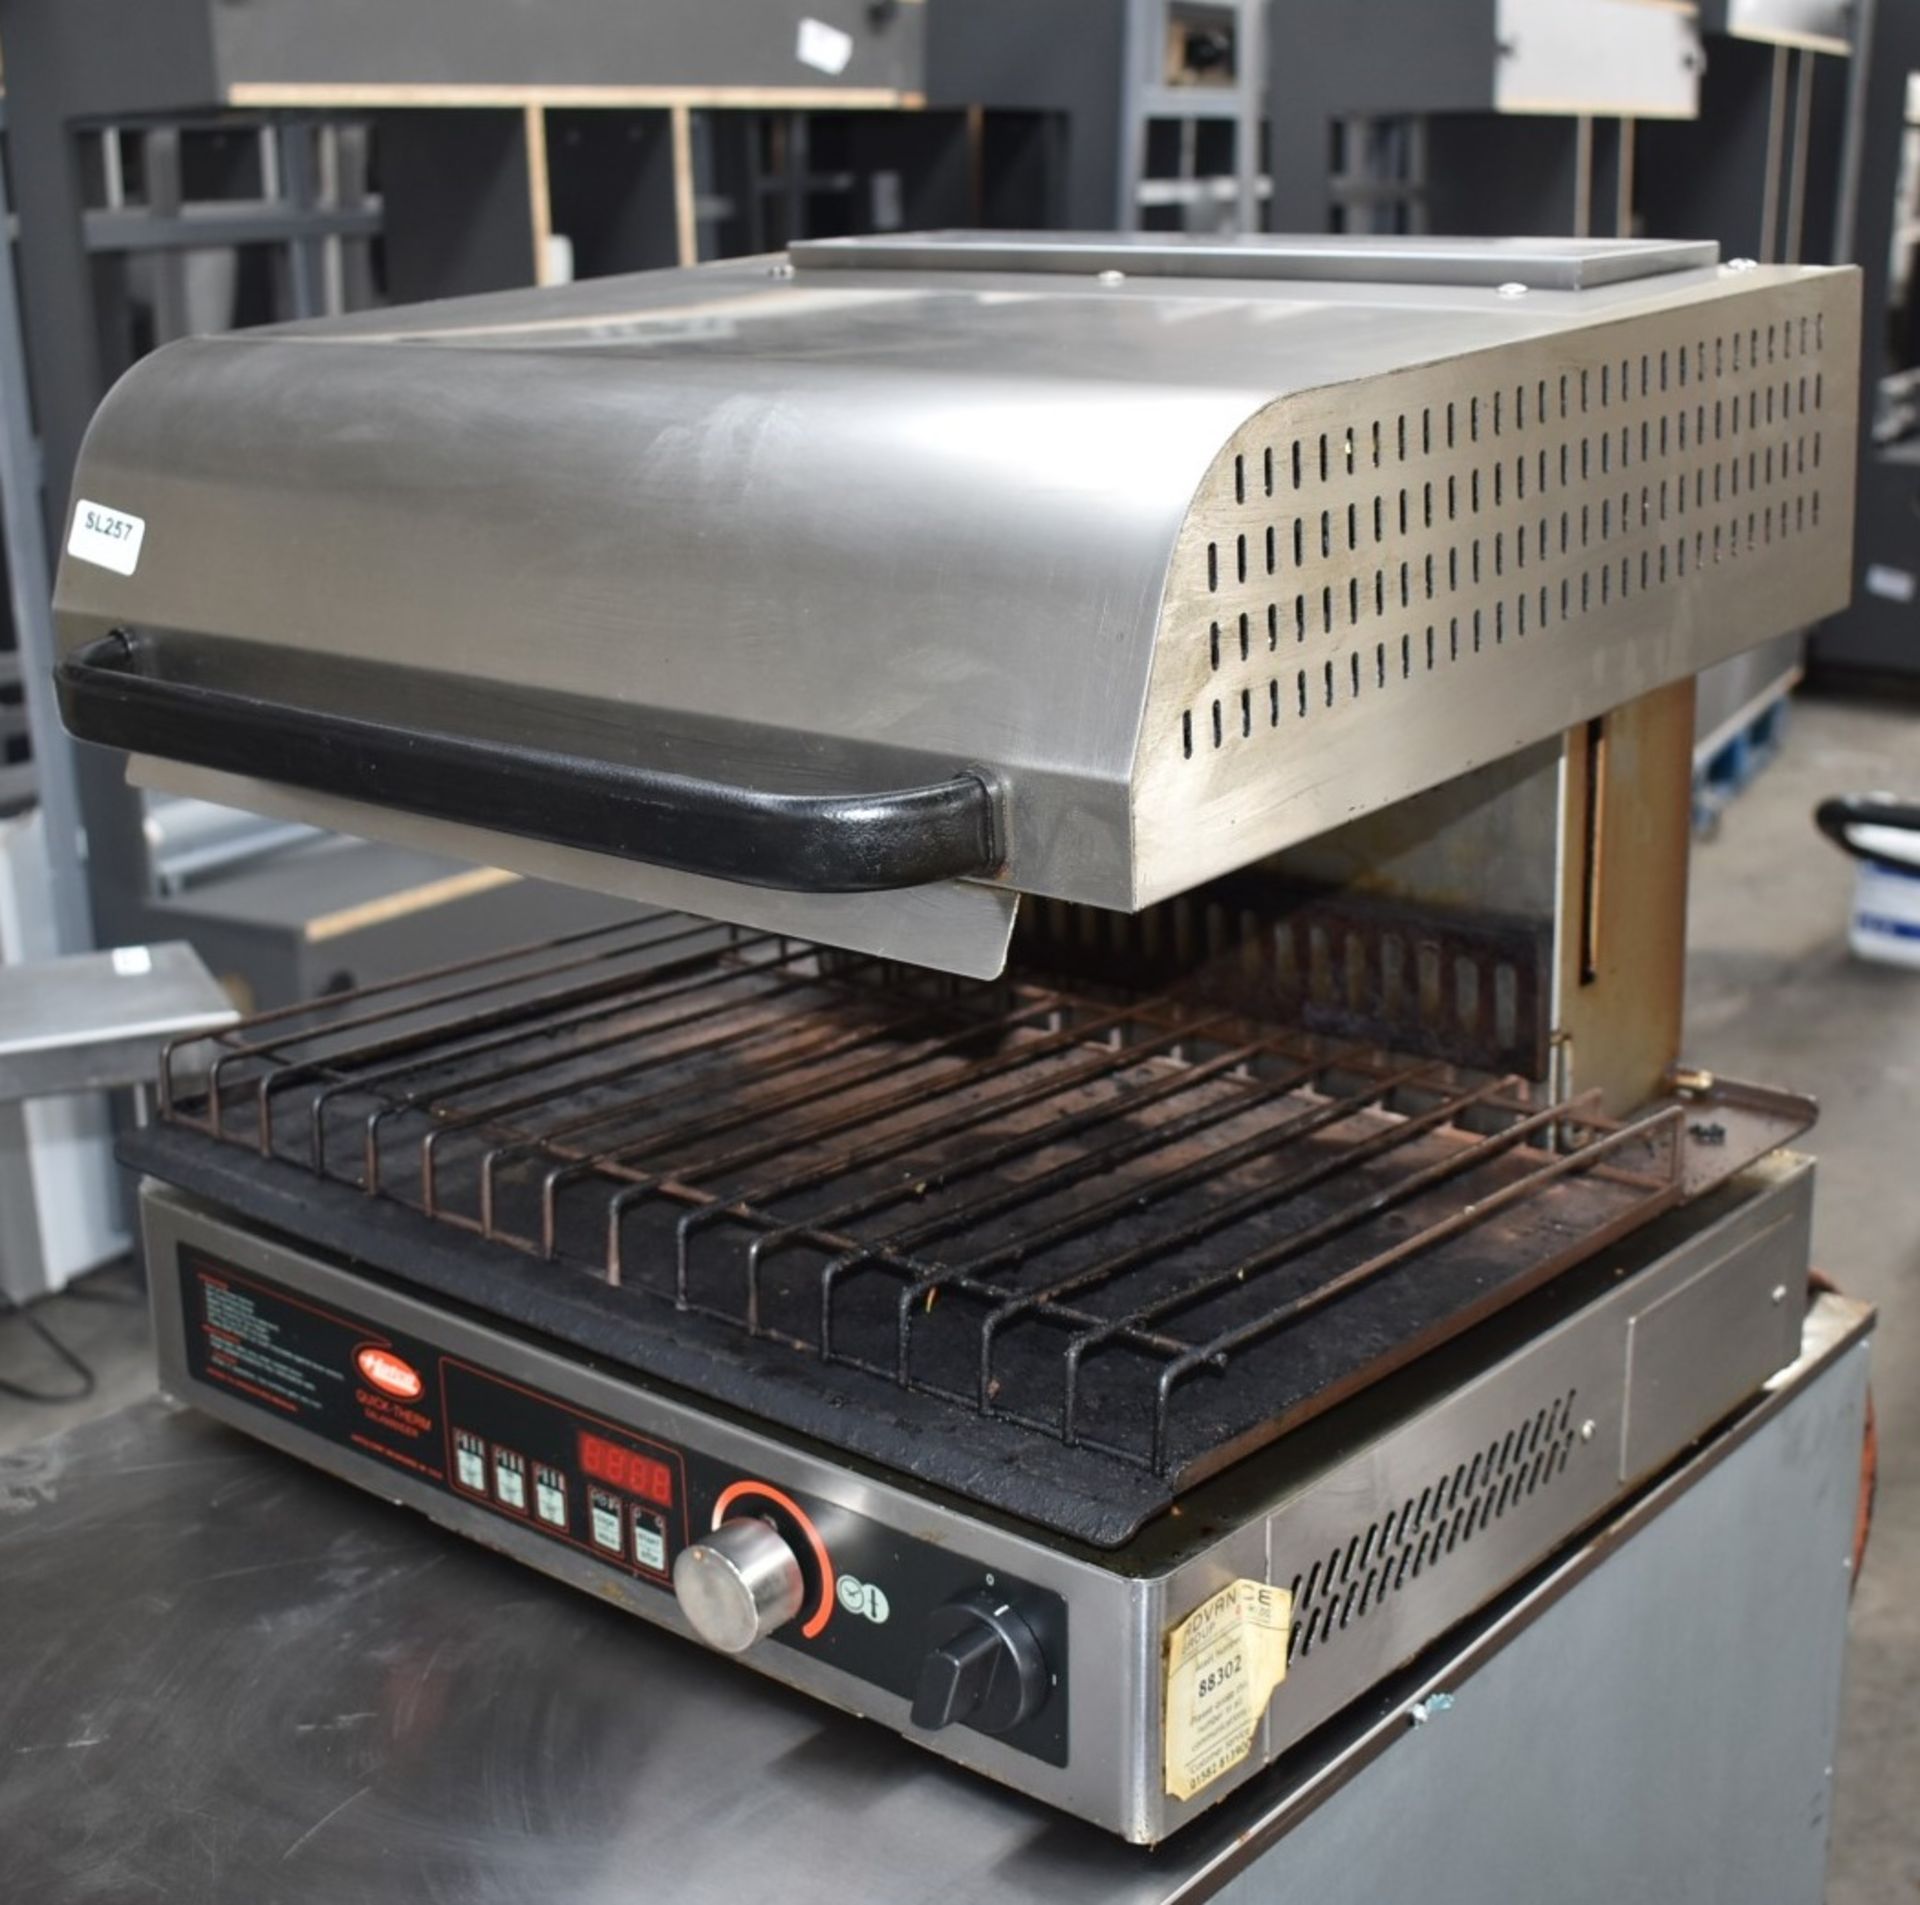 1 x Hatco Quick Therm Rise and Fall Salamander Grill - Model QTS00003  - 3 Phase - Recently